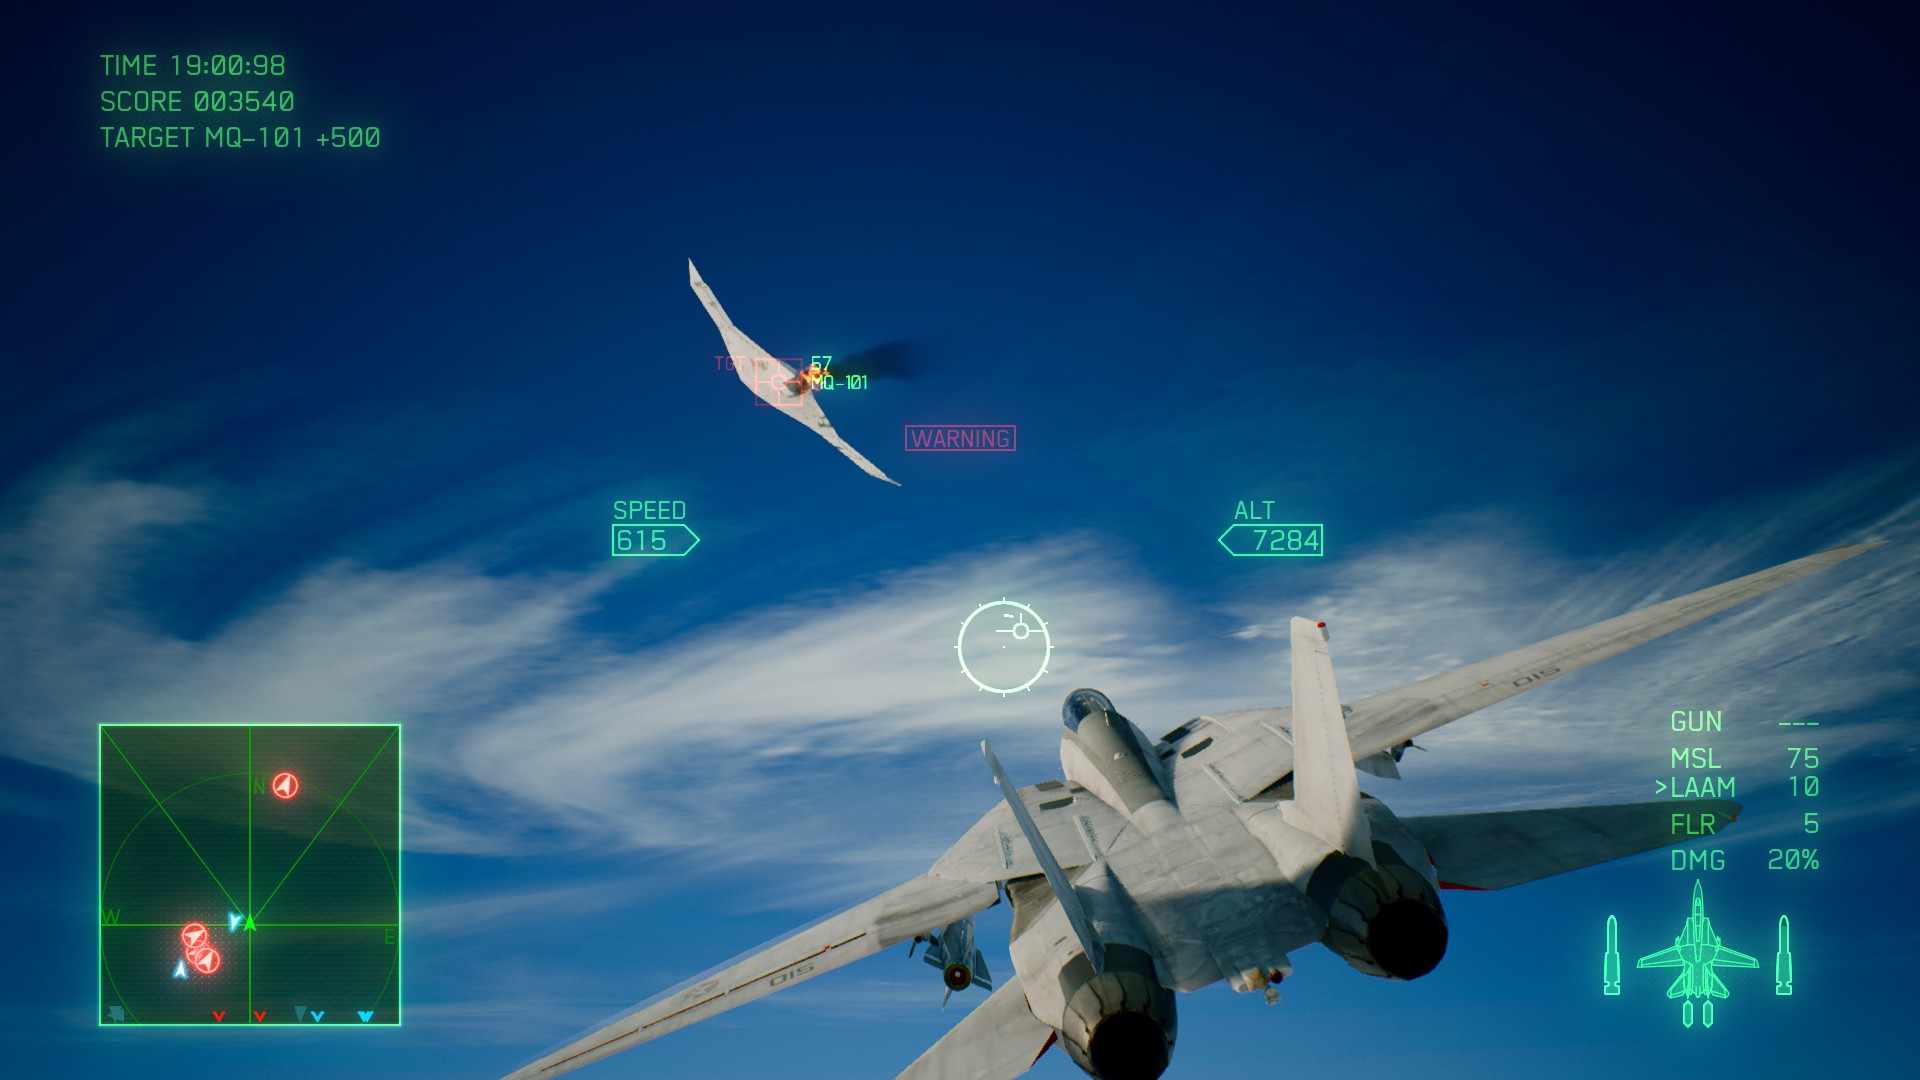 What's your guys favorite mission in ace combat 7? I'll go first